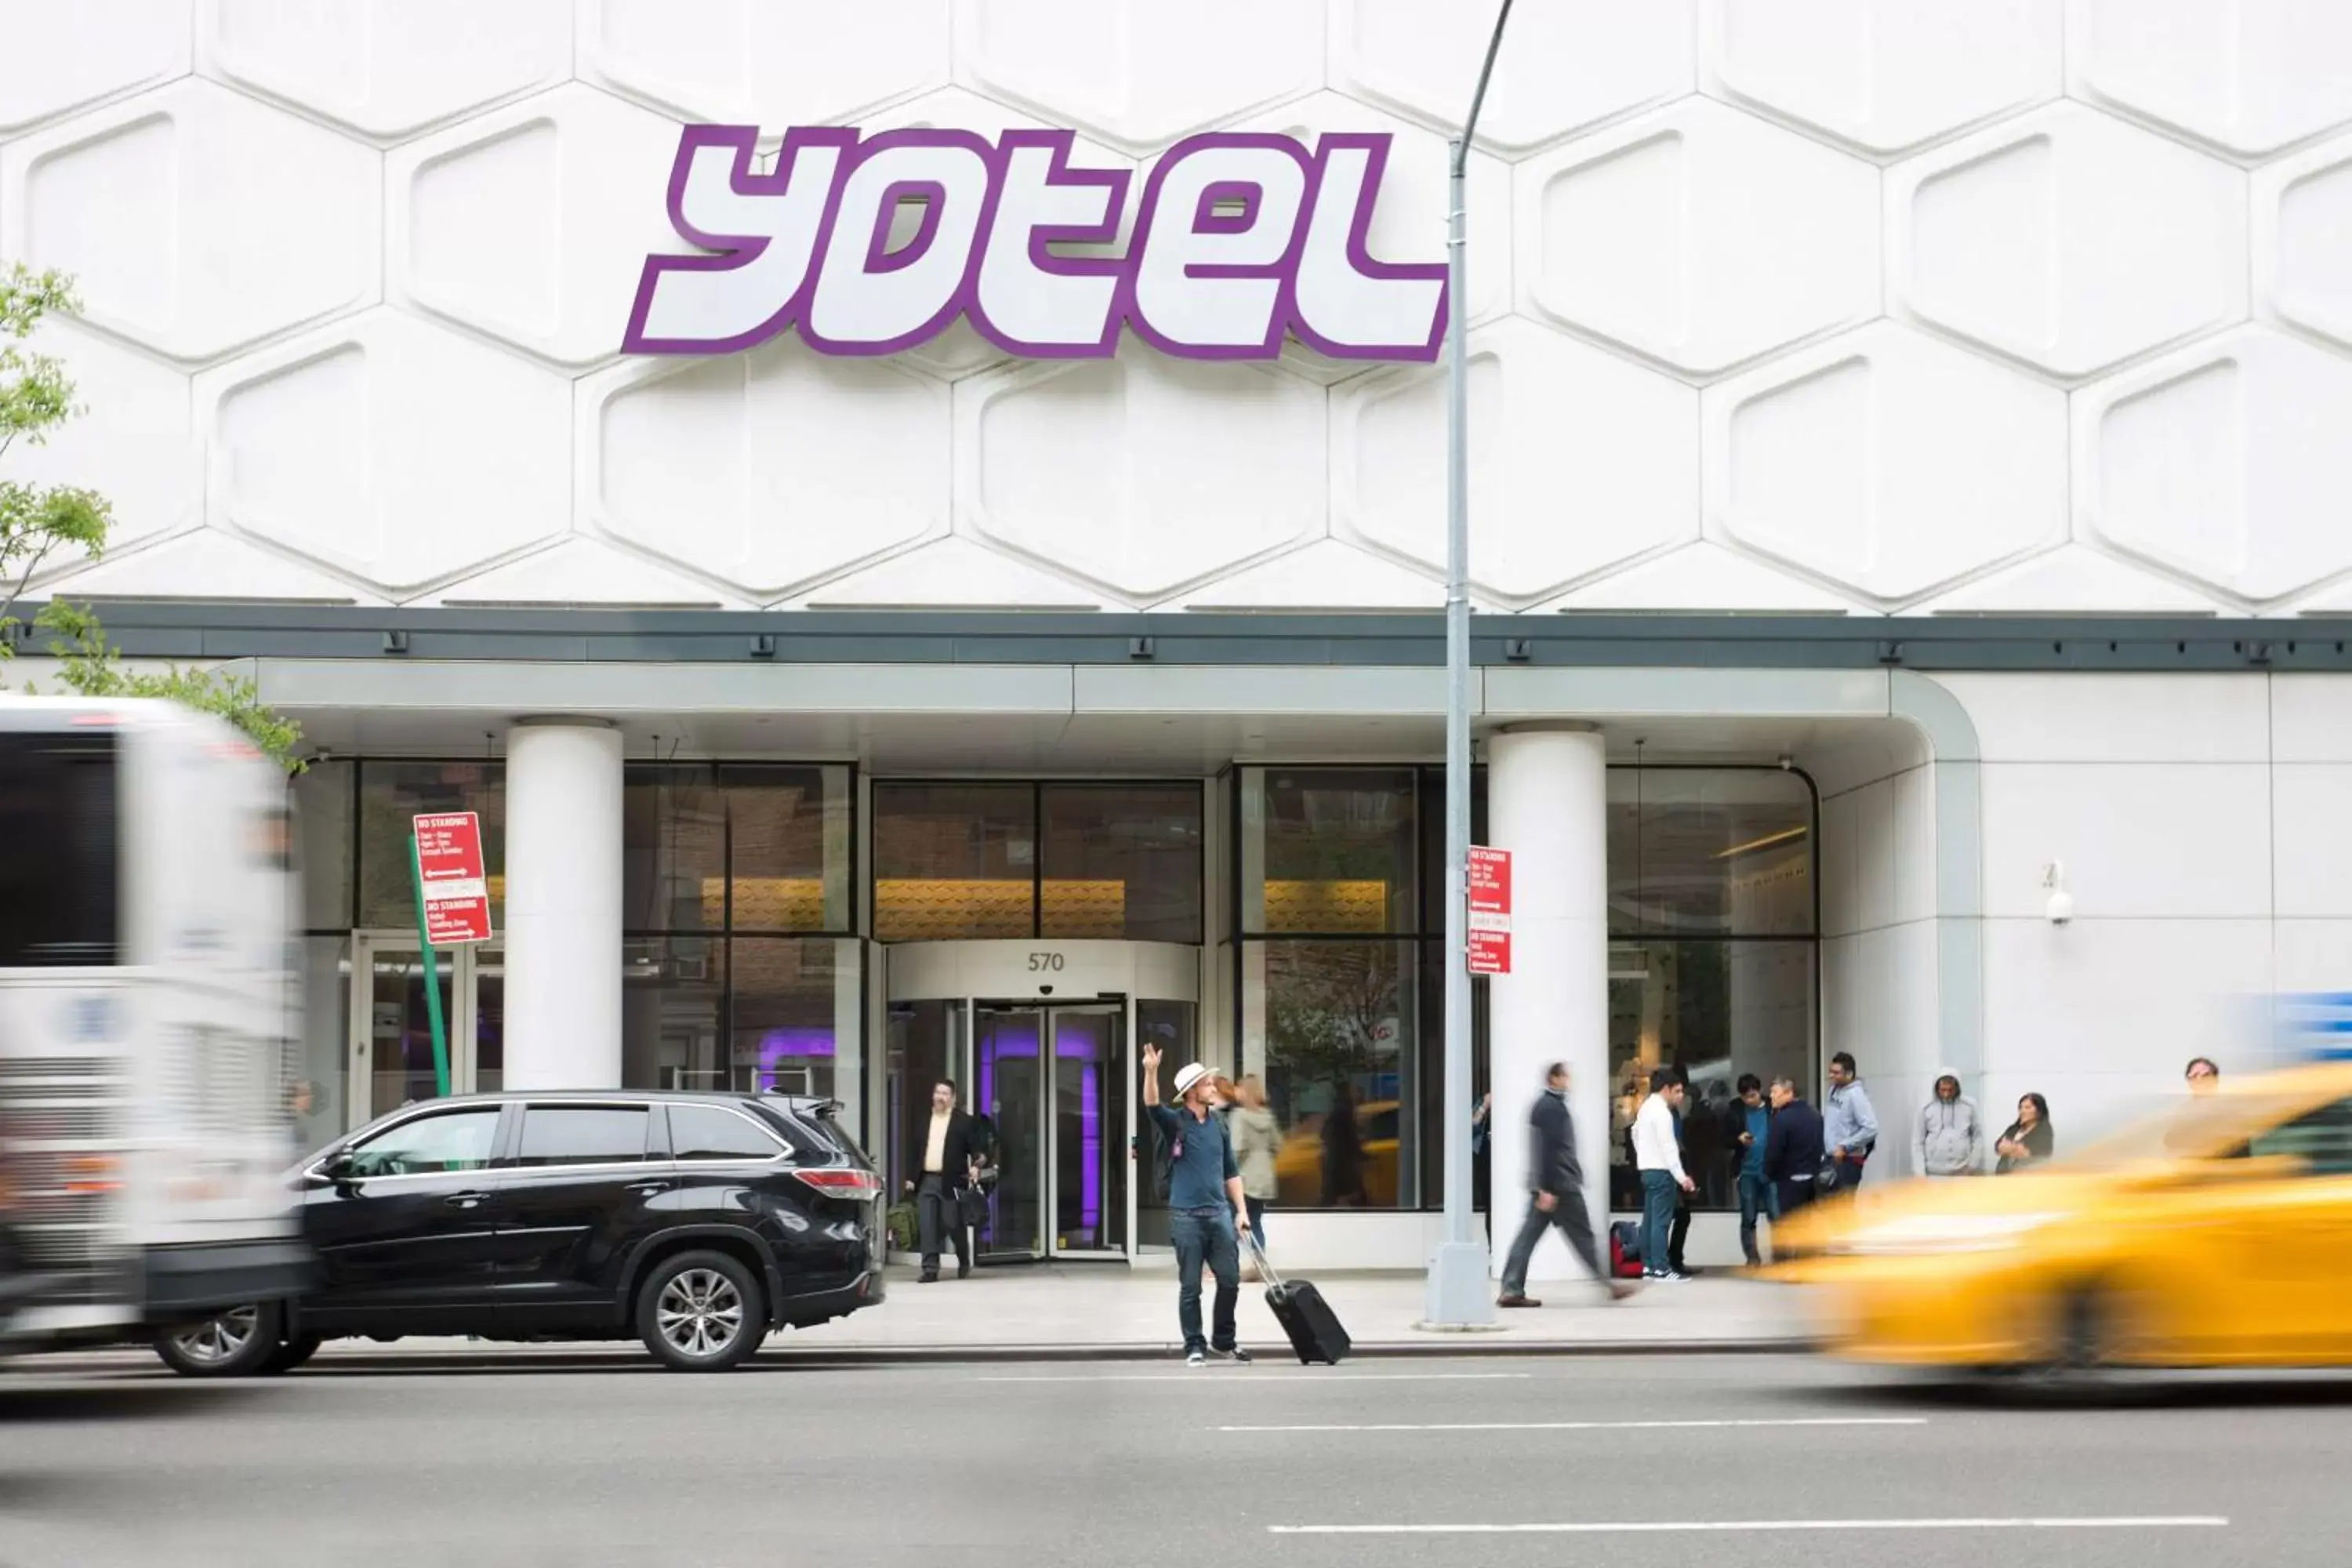 Property building in YOTEL New York Times Square